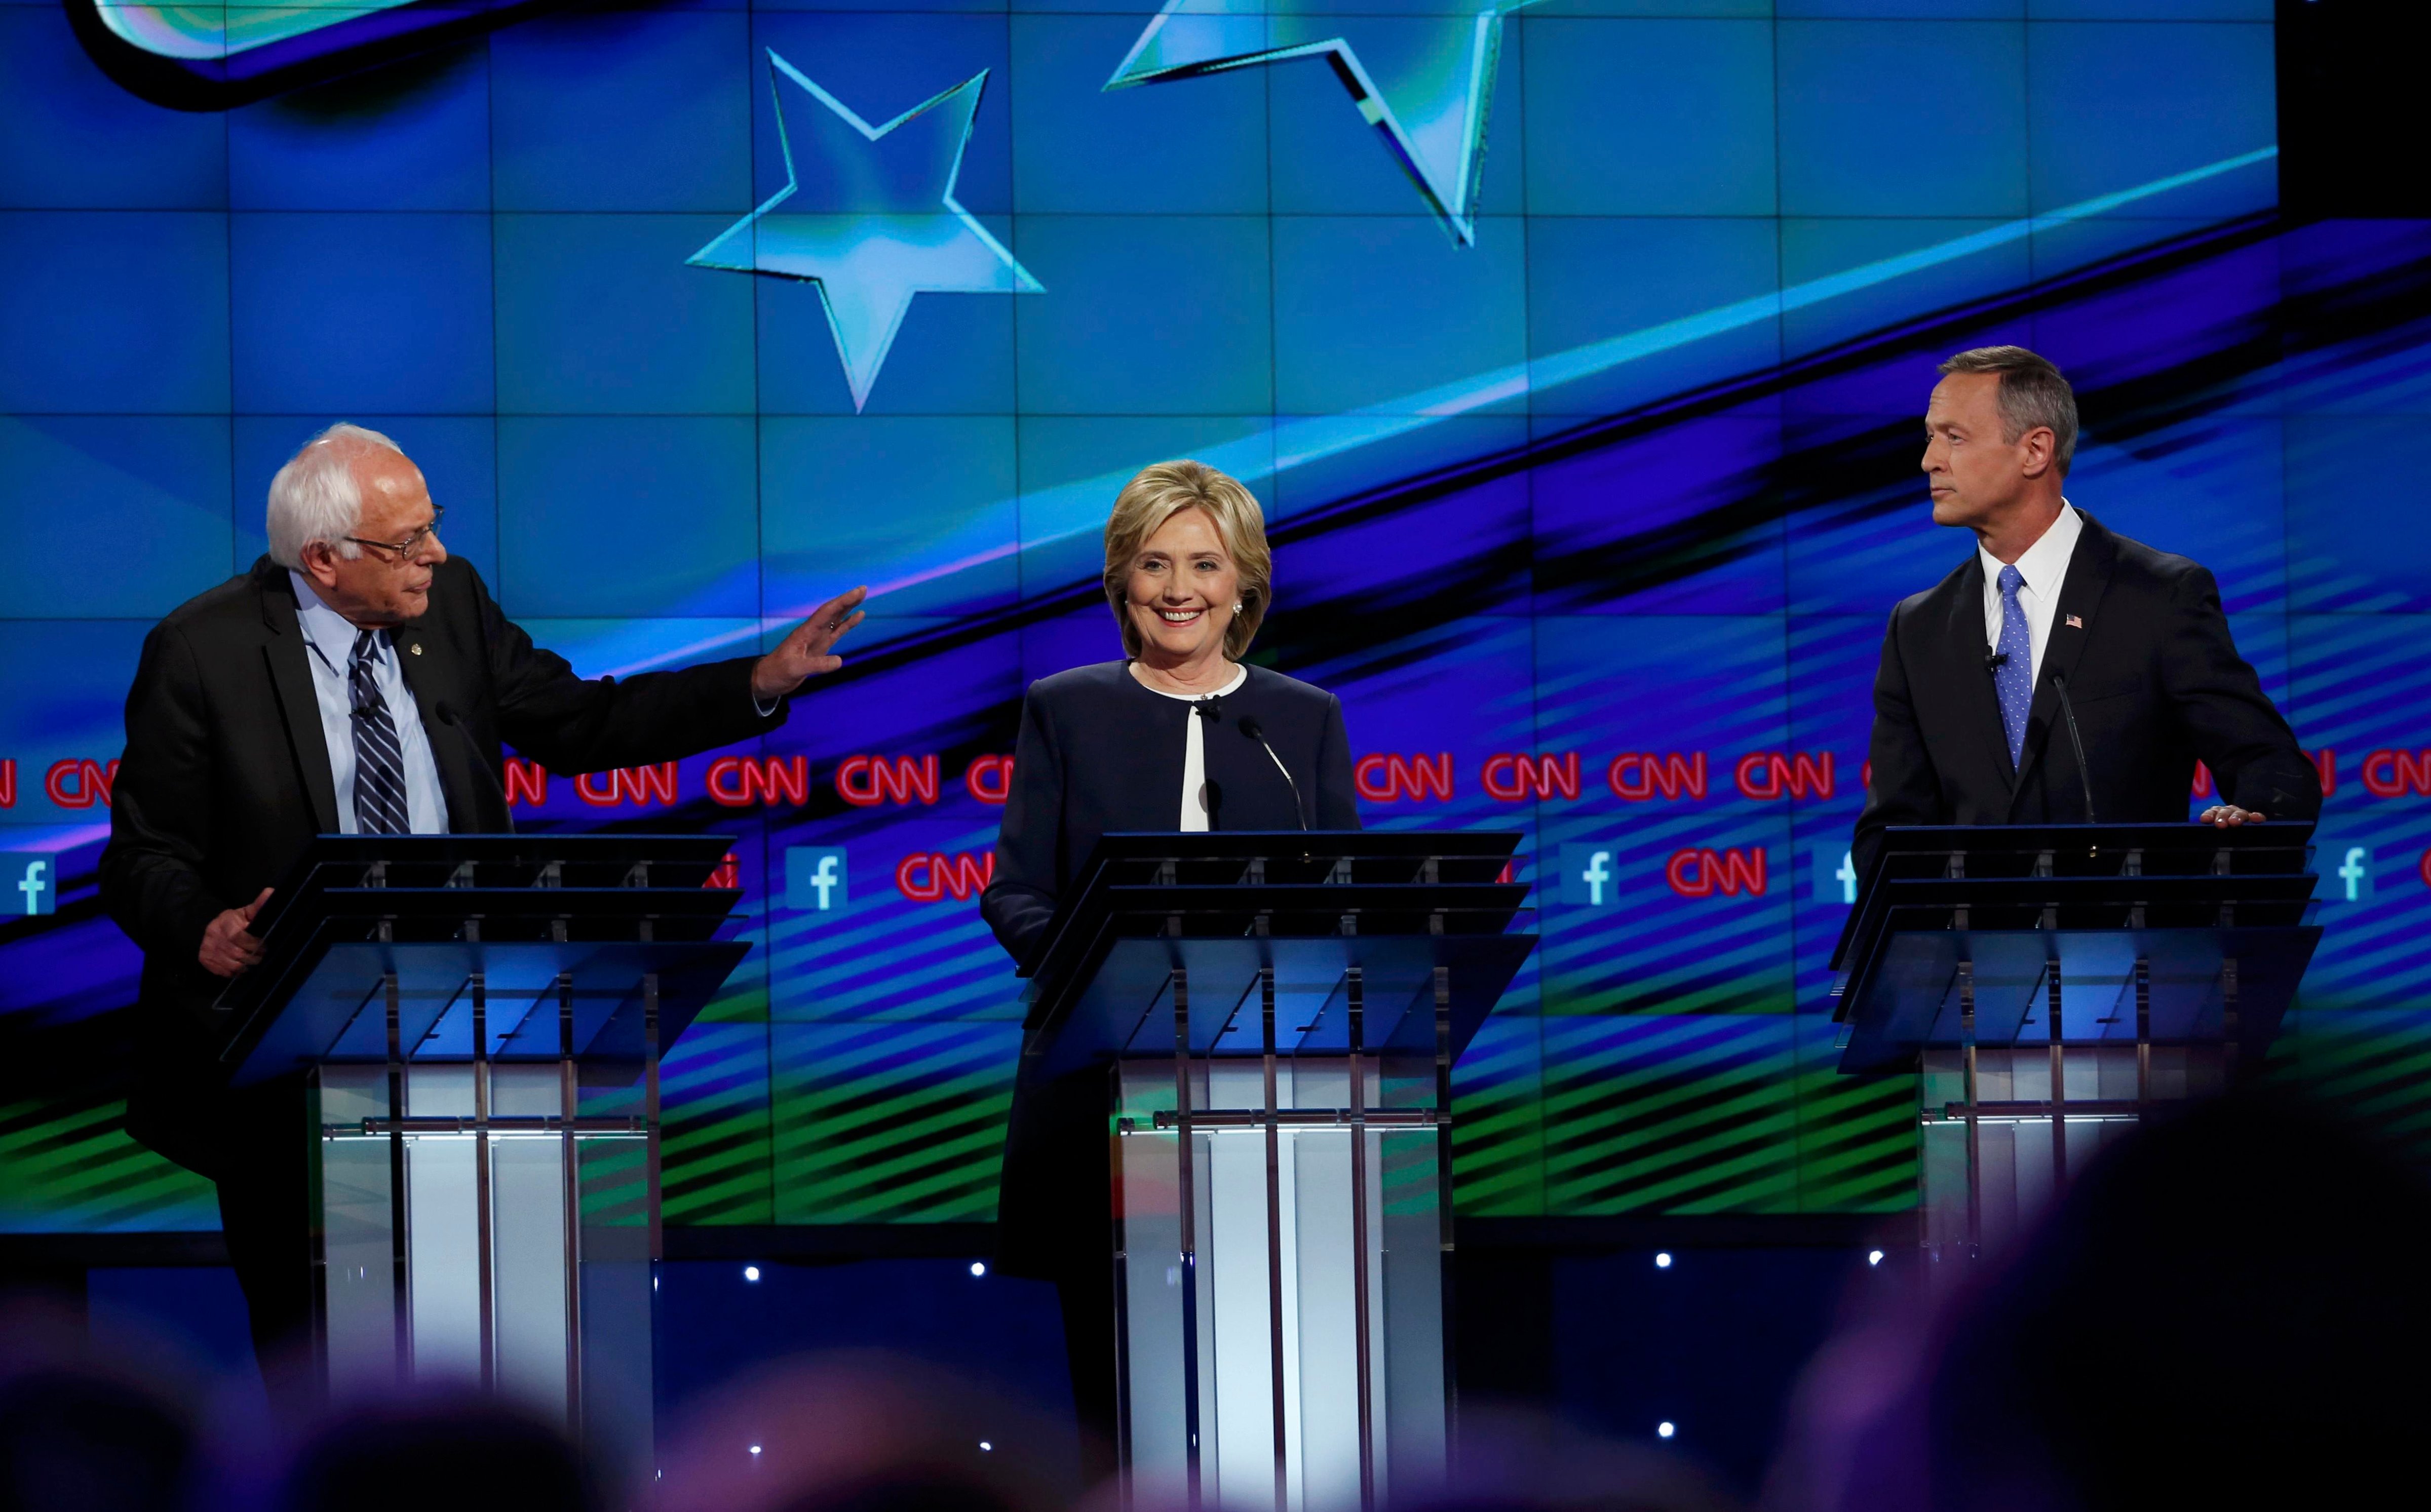 Democratic presidential candidates U.S. Senator Bernie Sanders (L), former Secretary of State Hillary Clinton and former Maryland Governor Martin O'Malley (R) debate during the first official Democratic candidates debate of the 2016 presidential campaign in Las Vegas, Nevada on Oct. 13, 2015. (Lucy Nicholson—Reuters)